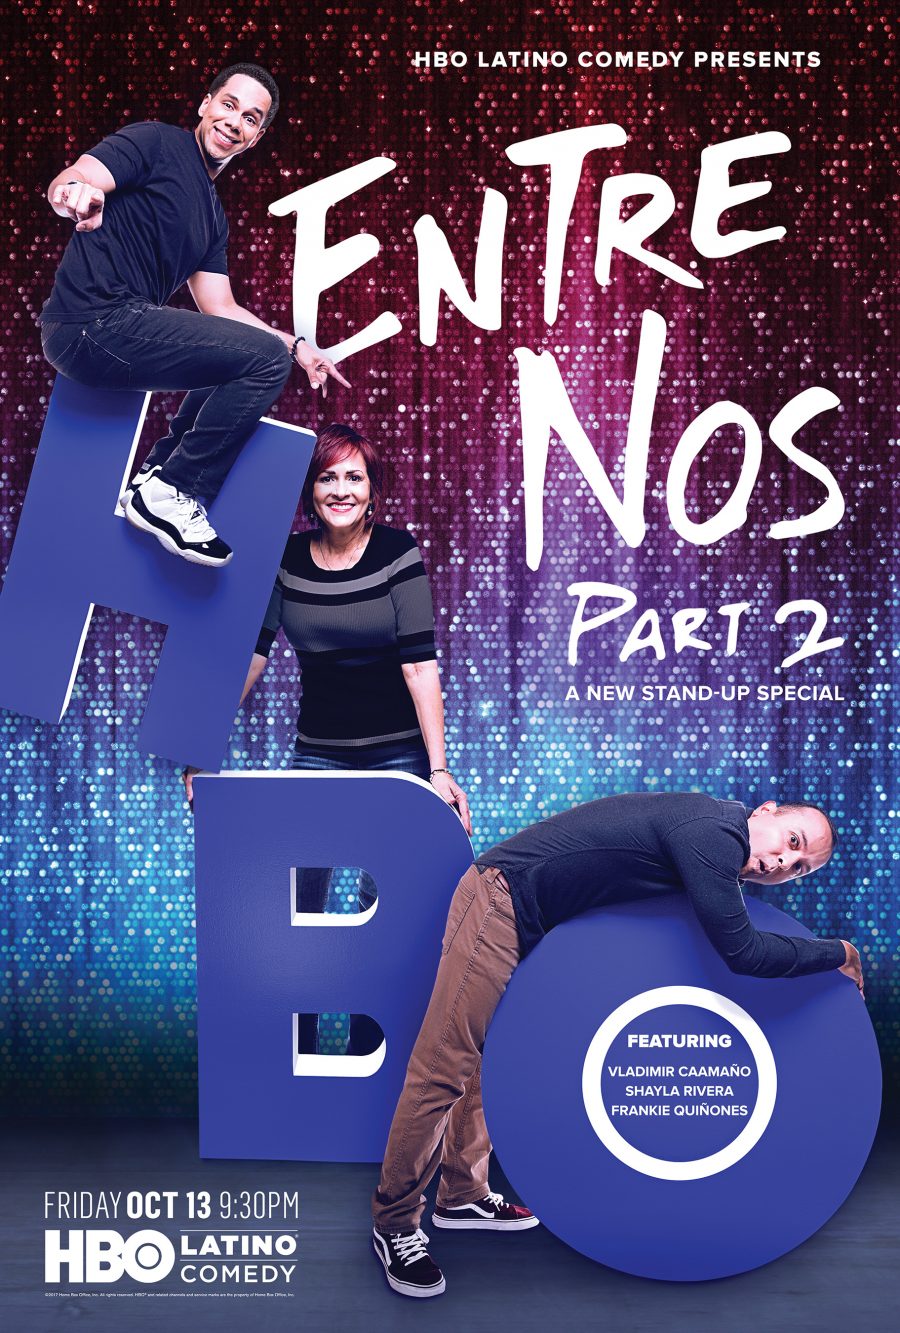 HBO plans second Latino comedy showcase, Entre Nos: Part 2, with Vladmir Caamaño, Frankie Quiñoes and Shayla Rivera